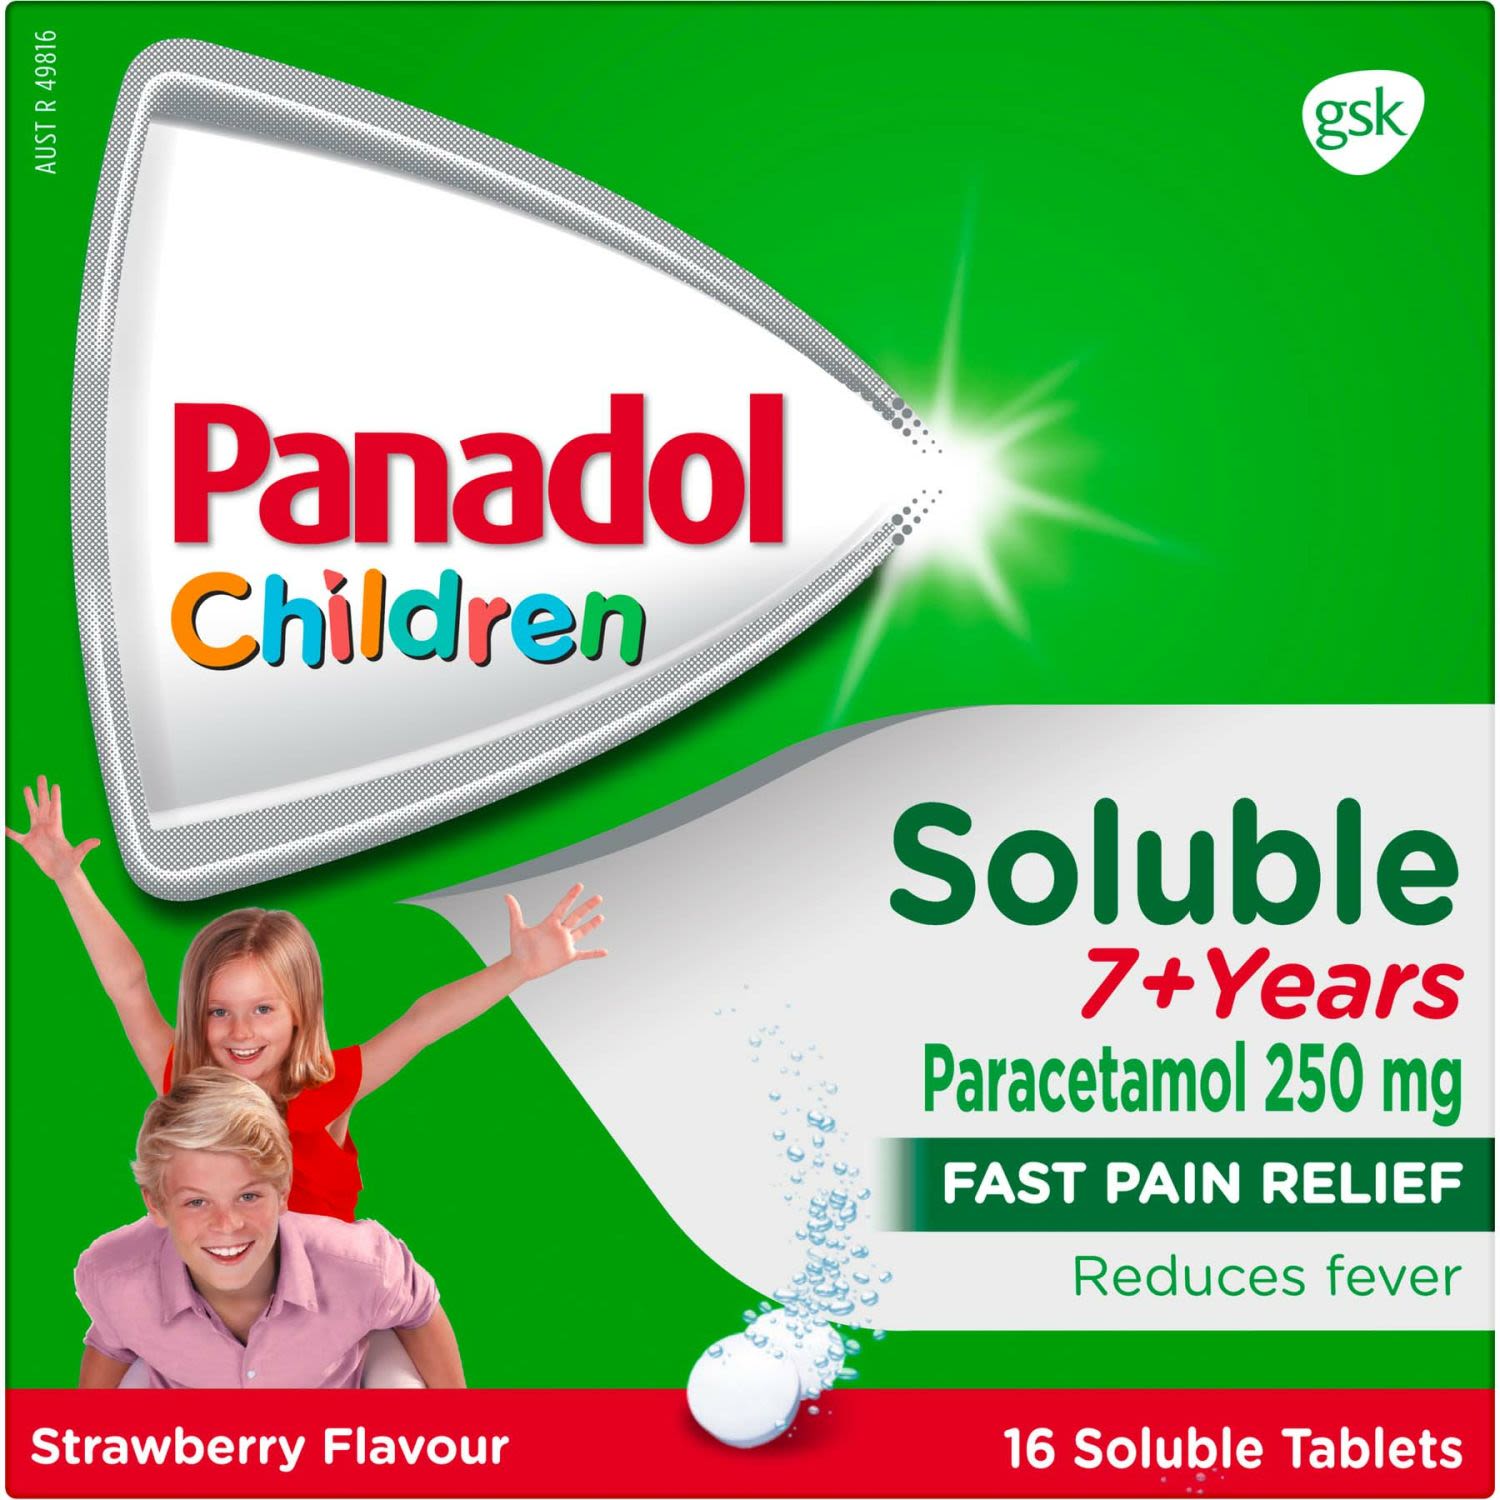 Panadol Children 7+ Years Soluble Tablets Strawberry, 16 Each